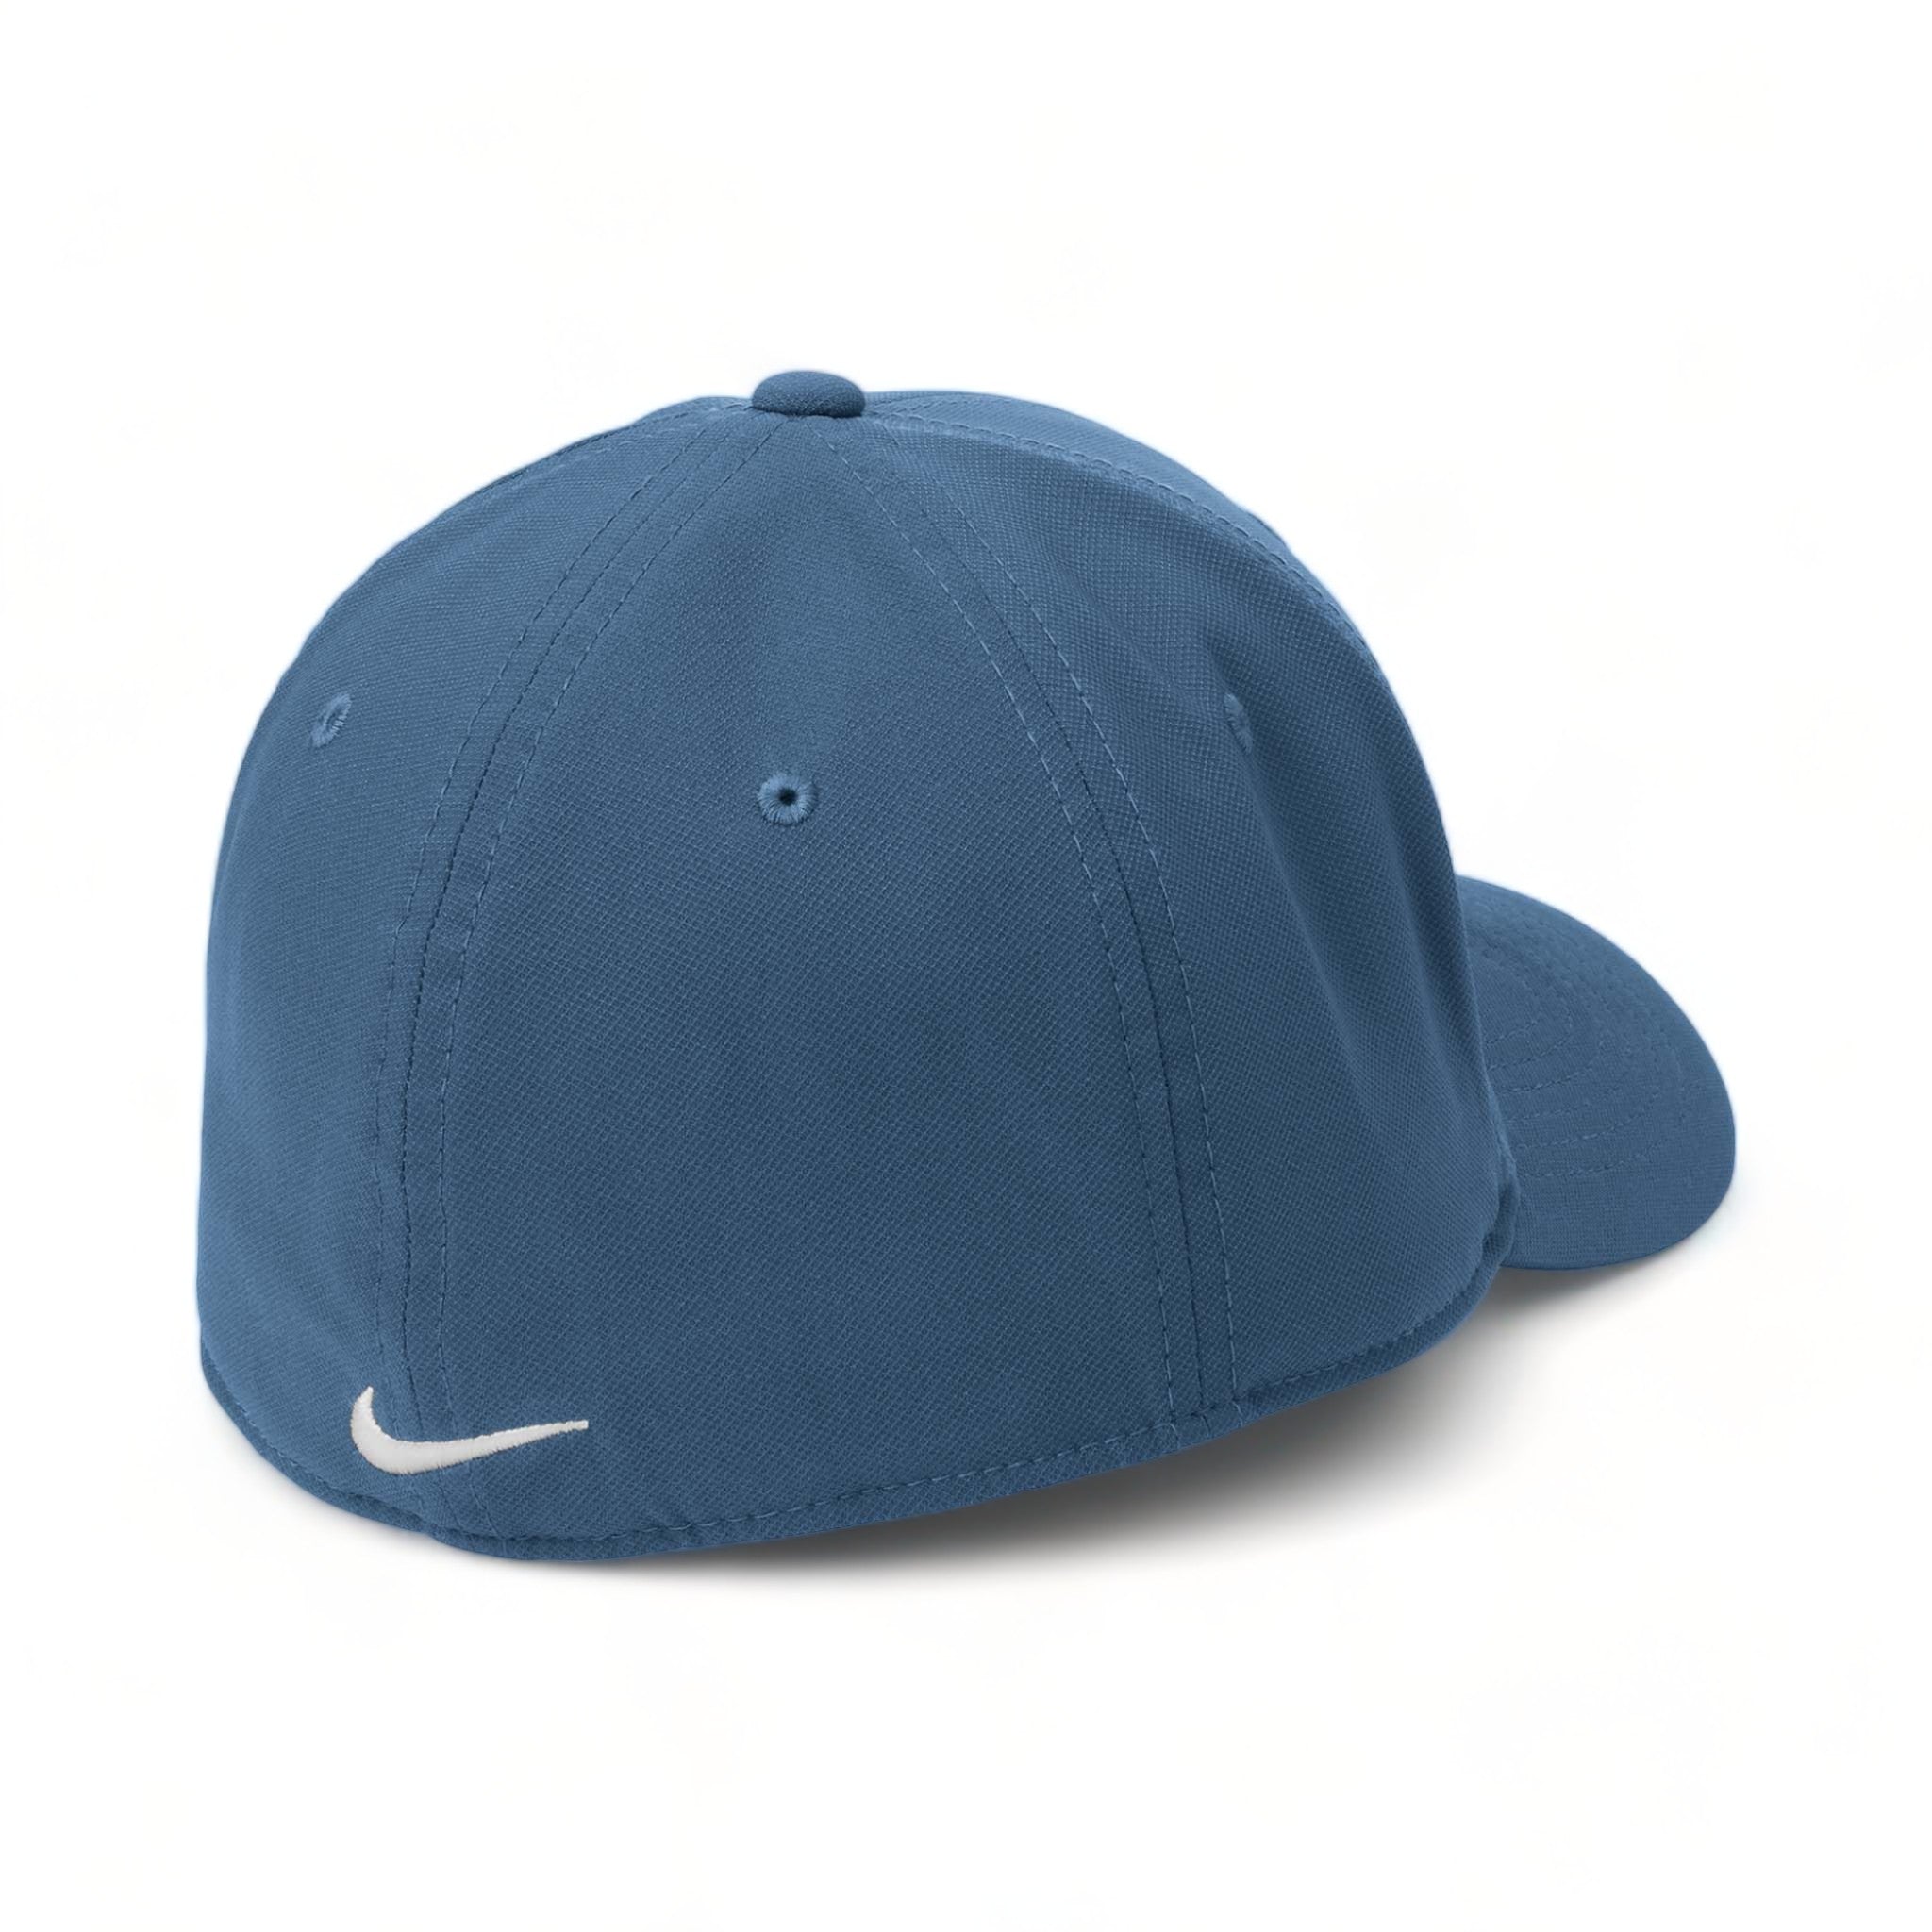 Back view of Nike NKAA1860 custom hat in navy and white